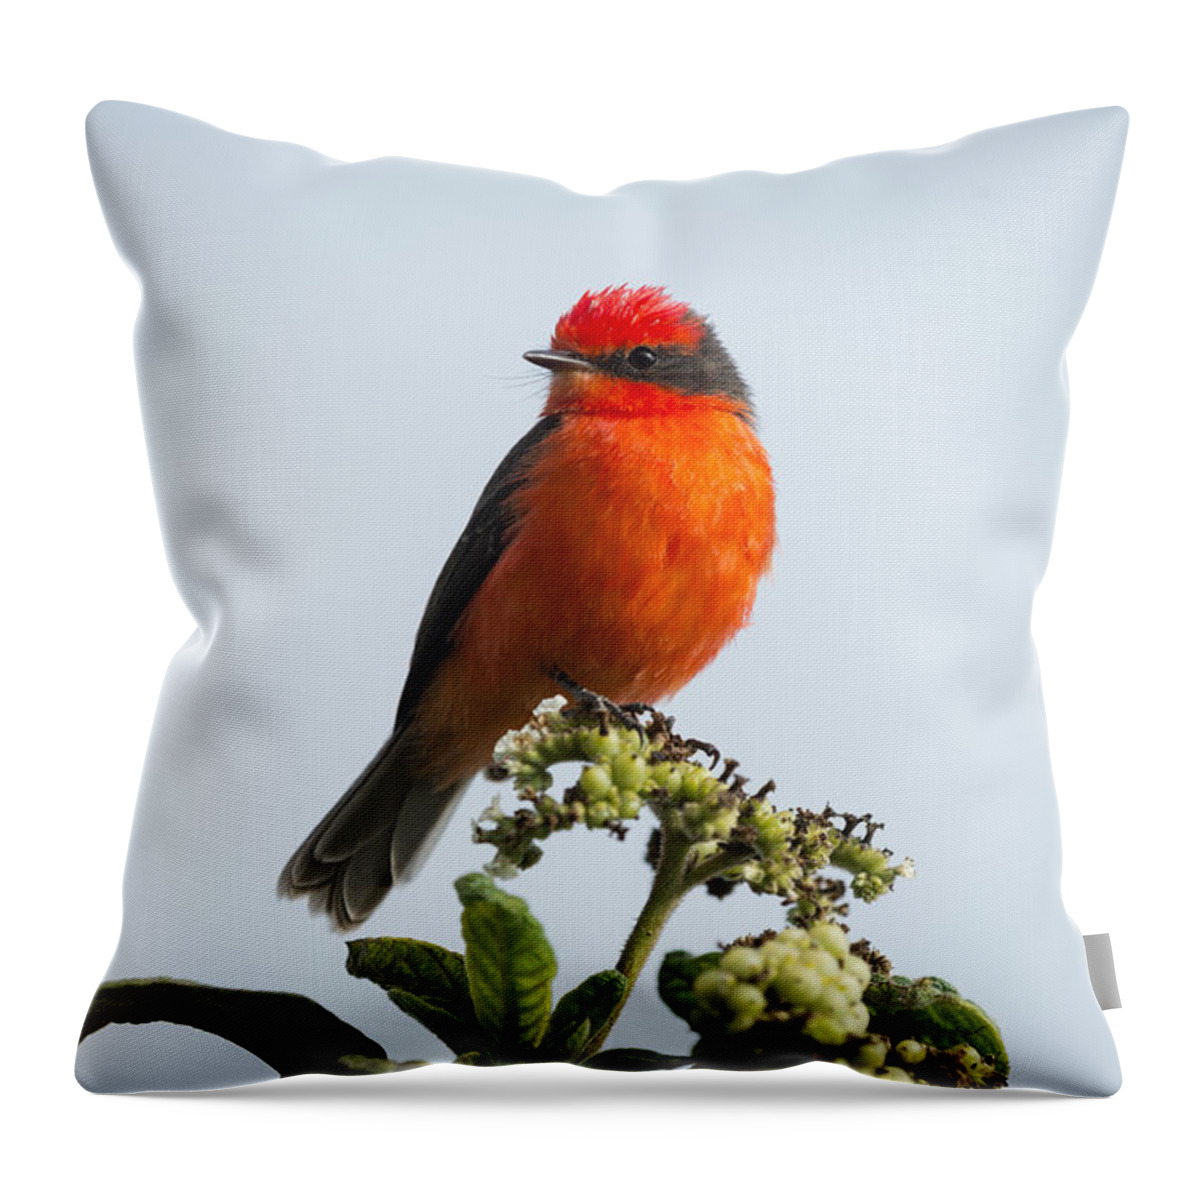 534177 Throw Pillow featuring the photograph Vermilion Flycatcher Galapagos by Tui De Roy